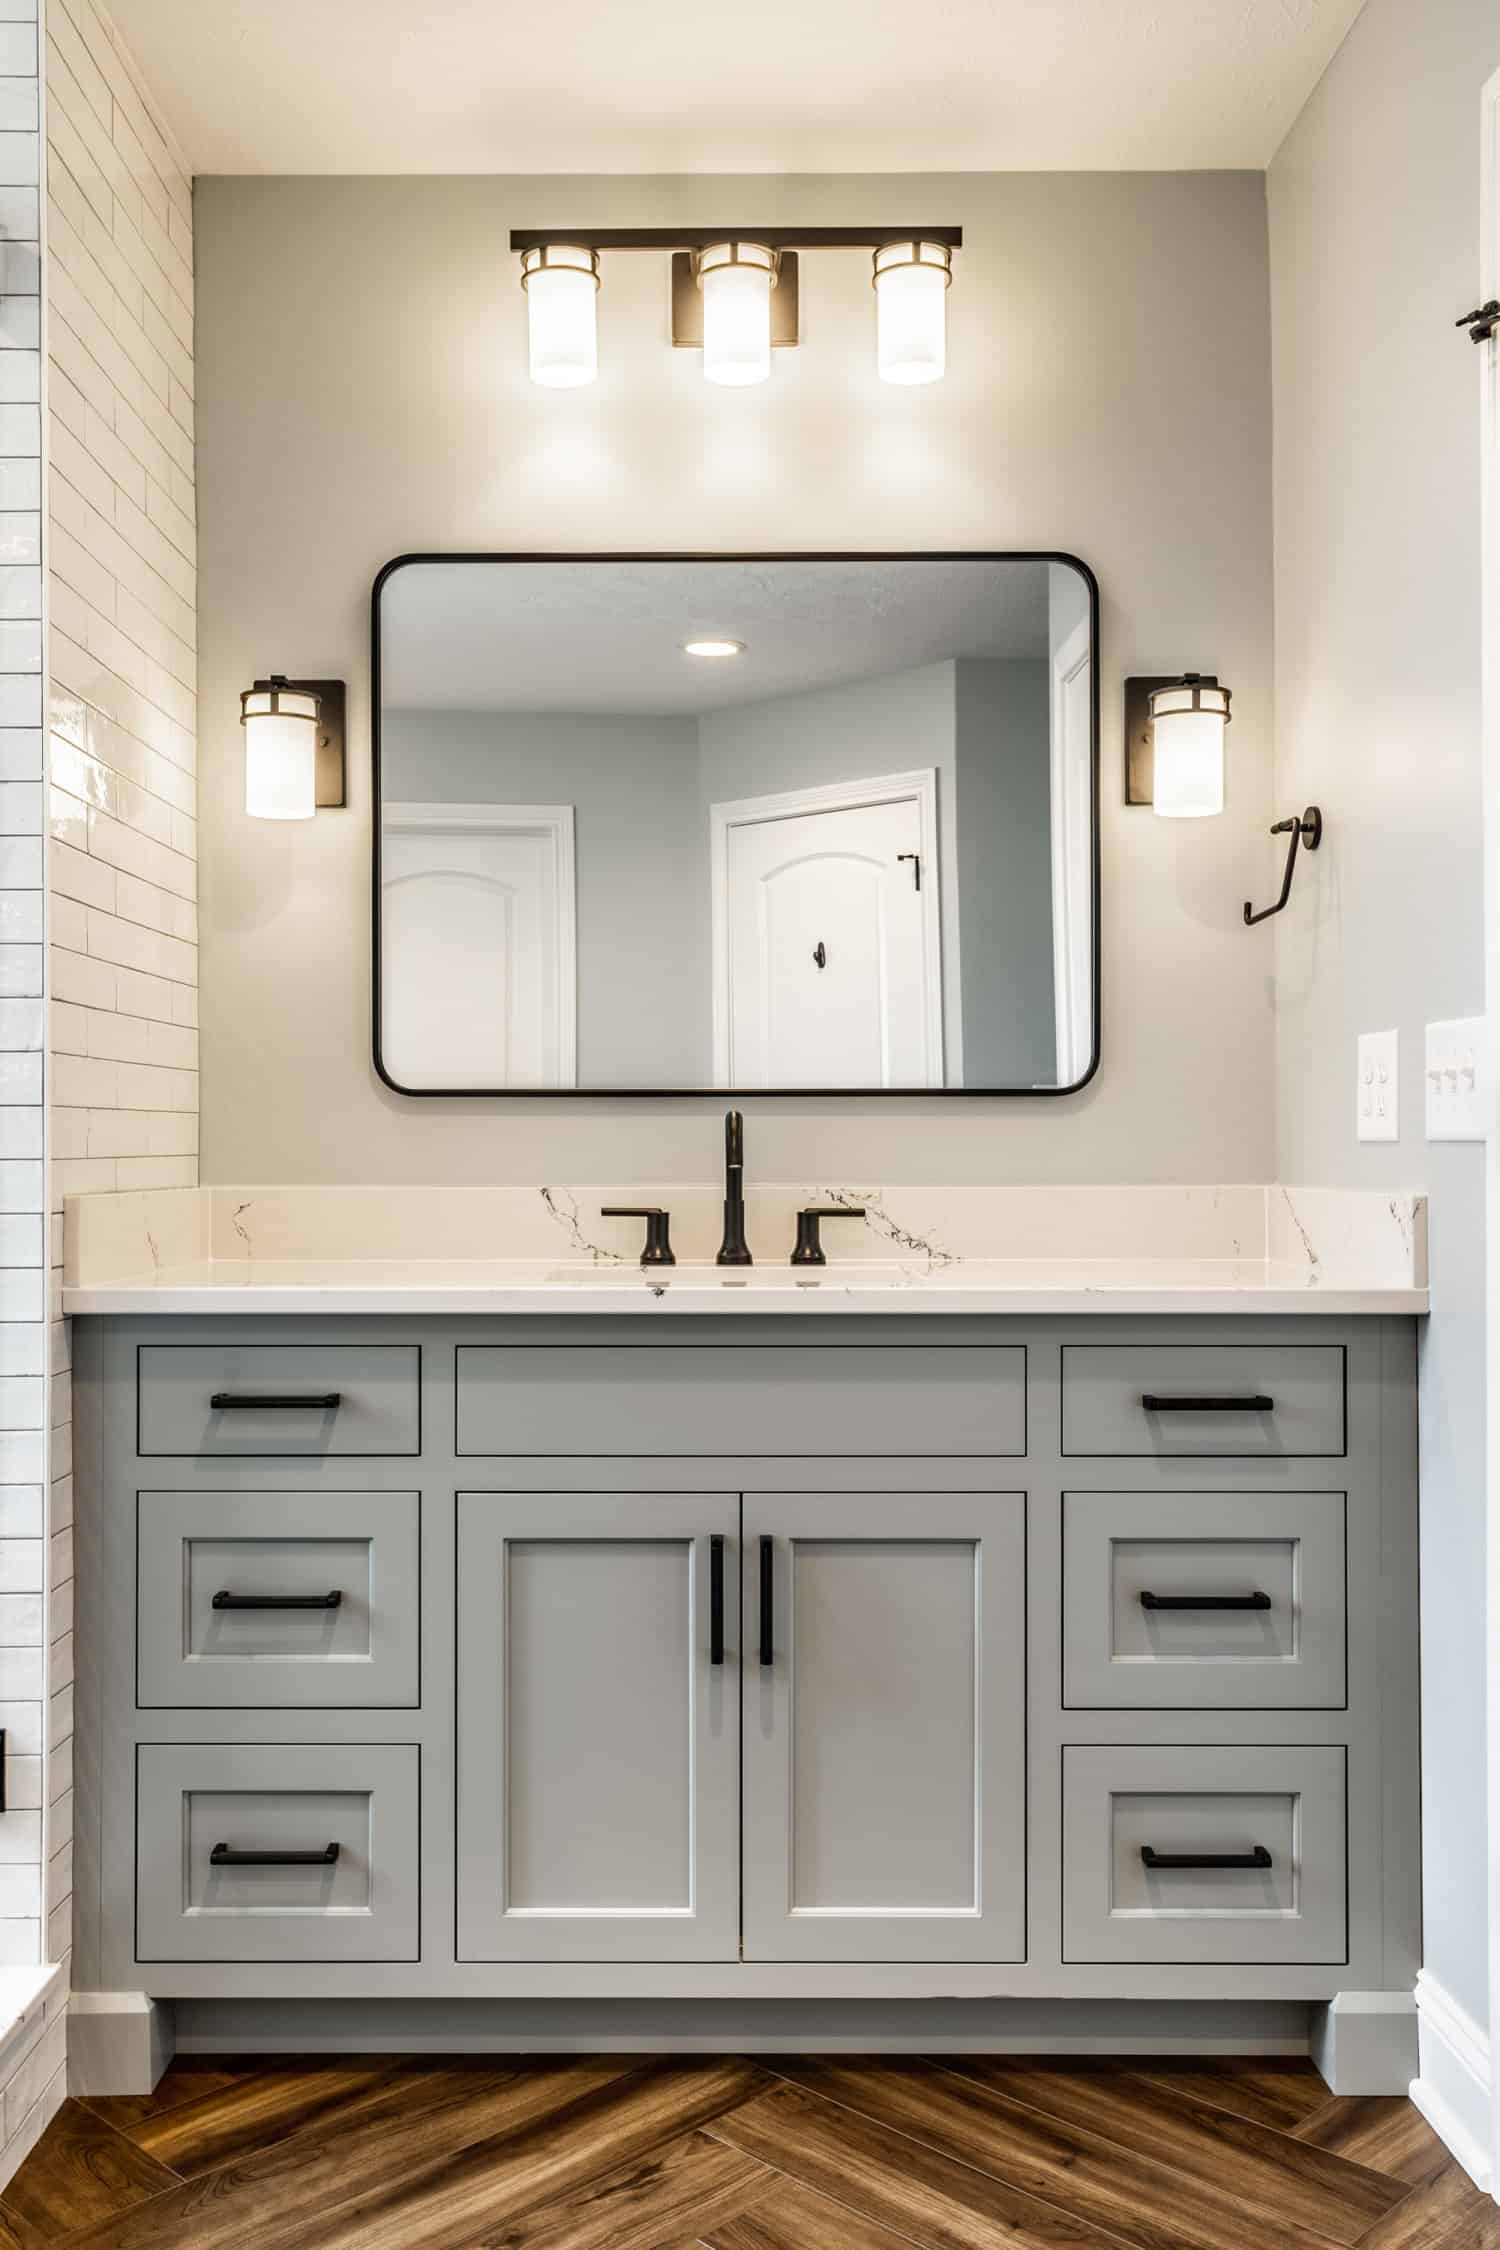 Nicholas Design Build | A bathroom with a gray vanity and mirrors, decorated in black accents.